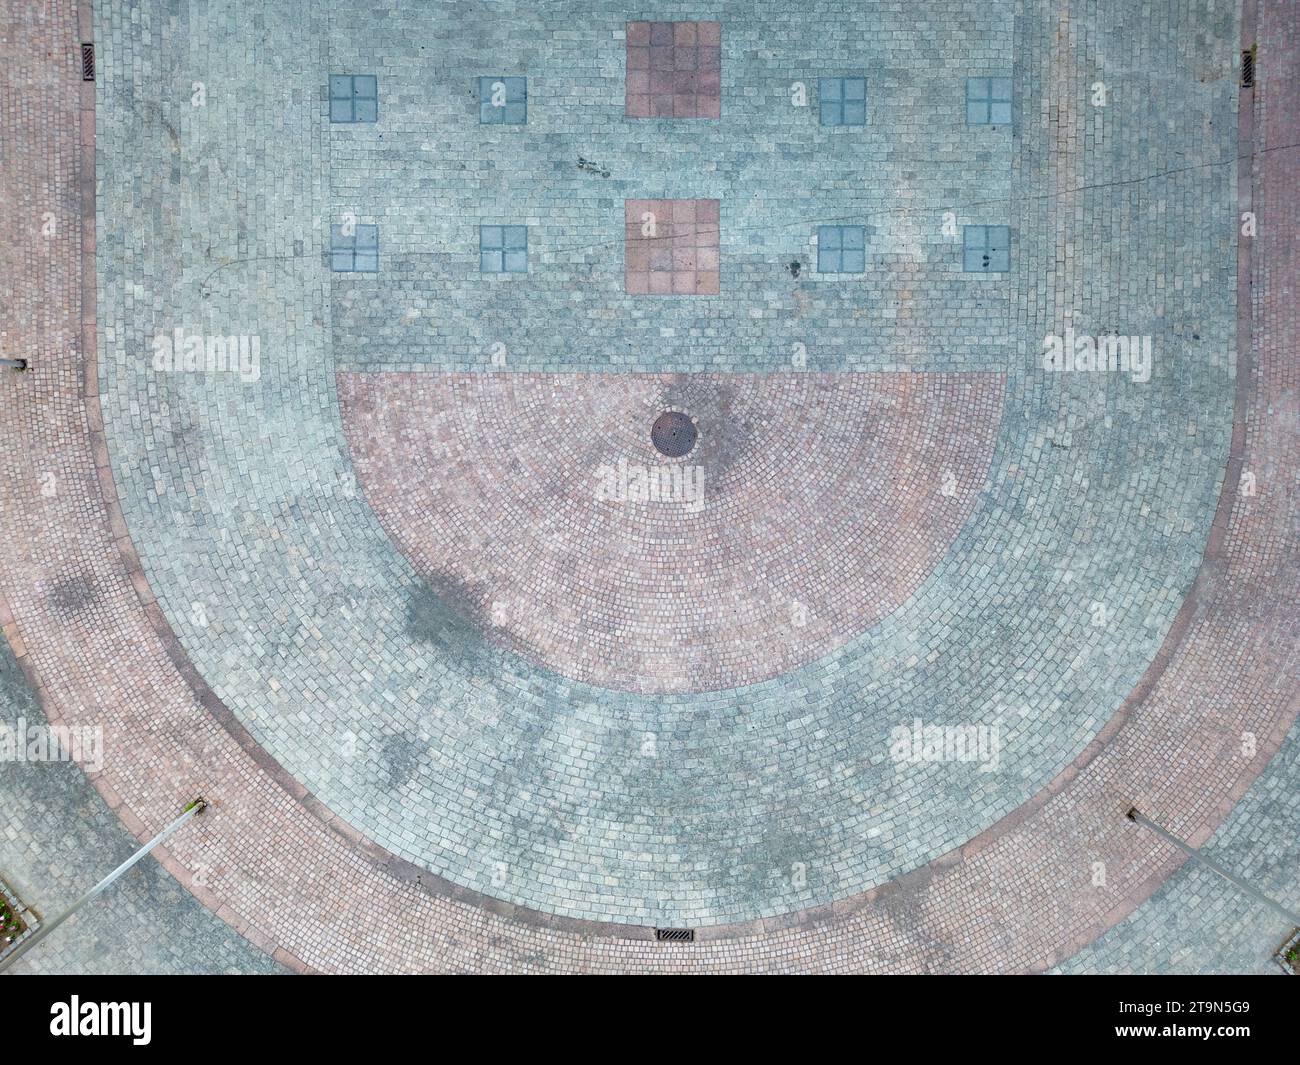 This image provides an aerial perspective of a sports court, seemingly worn by time and use. The faded markings and weathered surface speak to the many games and events that have taken place here. At the center, the basketball hoop casts a solitary shadow, standing as a silent witness to the court's history. The surrounding area appears to be in a state of disrepair or construction, adding a layer of intrigue to the urban scene. Urban Canvas: Aerial View of a Sports Court. High quality photo Stock Photo